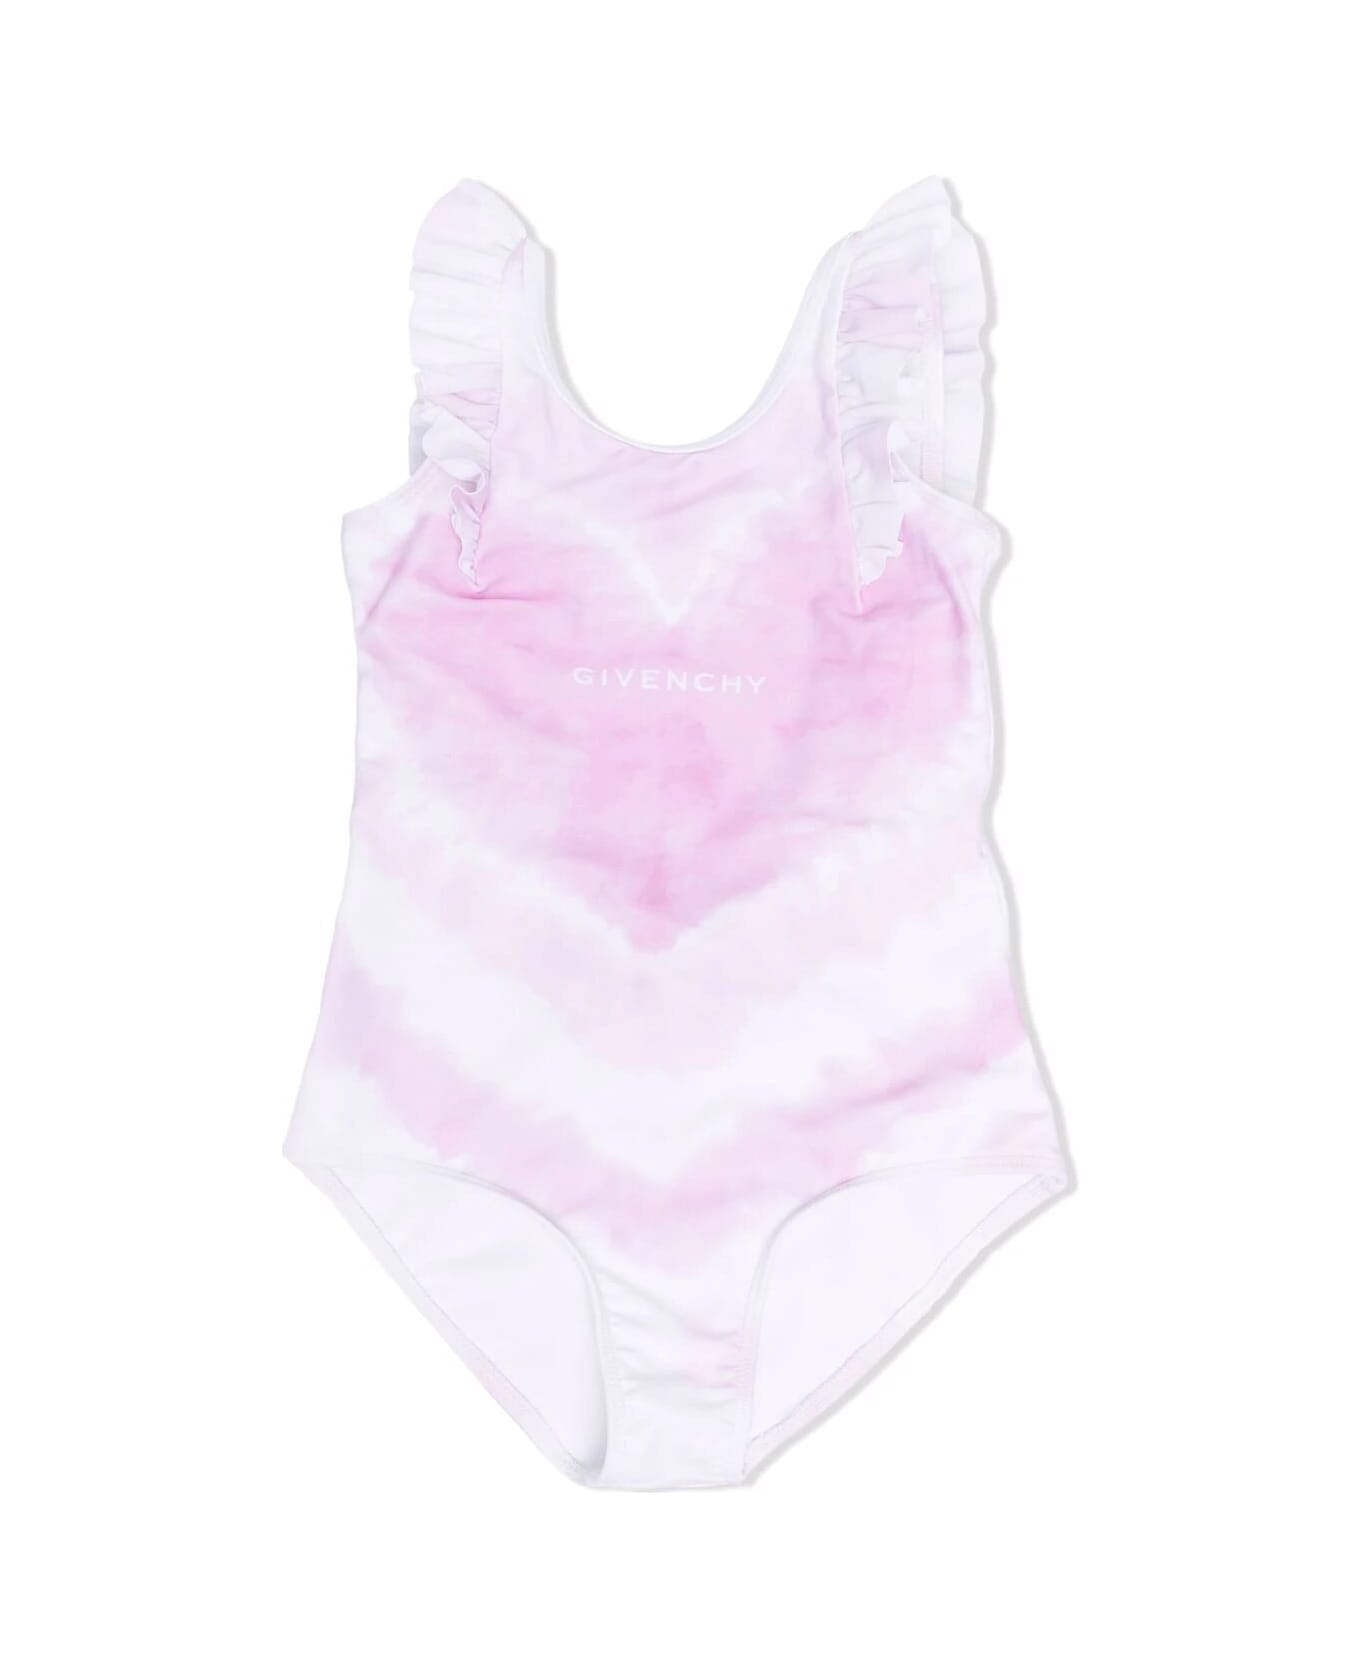 Givenchy Kids One-piece Swimsuit With City Givenchy Tie-dye Heart Print - Marshmallow